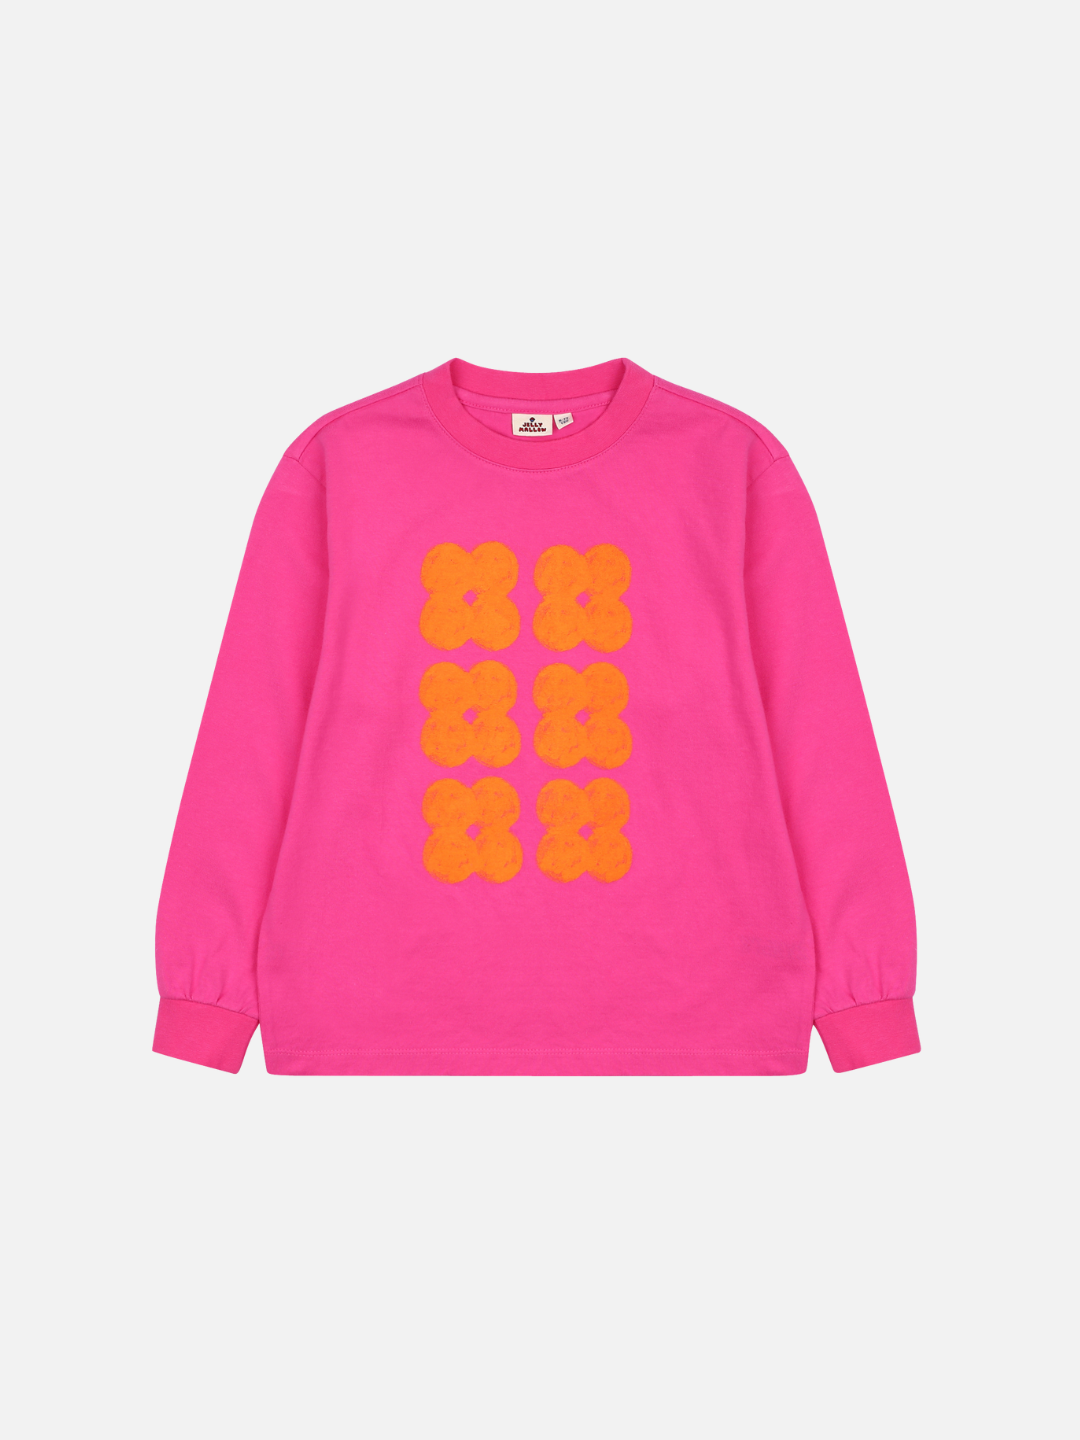 Front of Clover Long Sleeve Tshirt. Hot pink long sleeve t-shirt with six bright orange clovers in two rows down the center front.